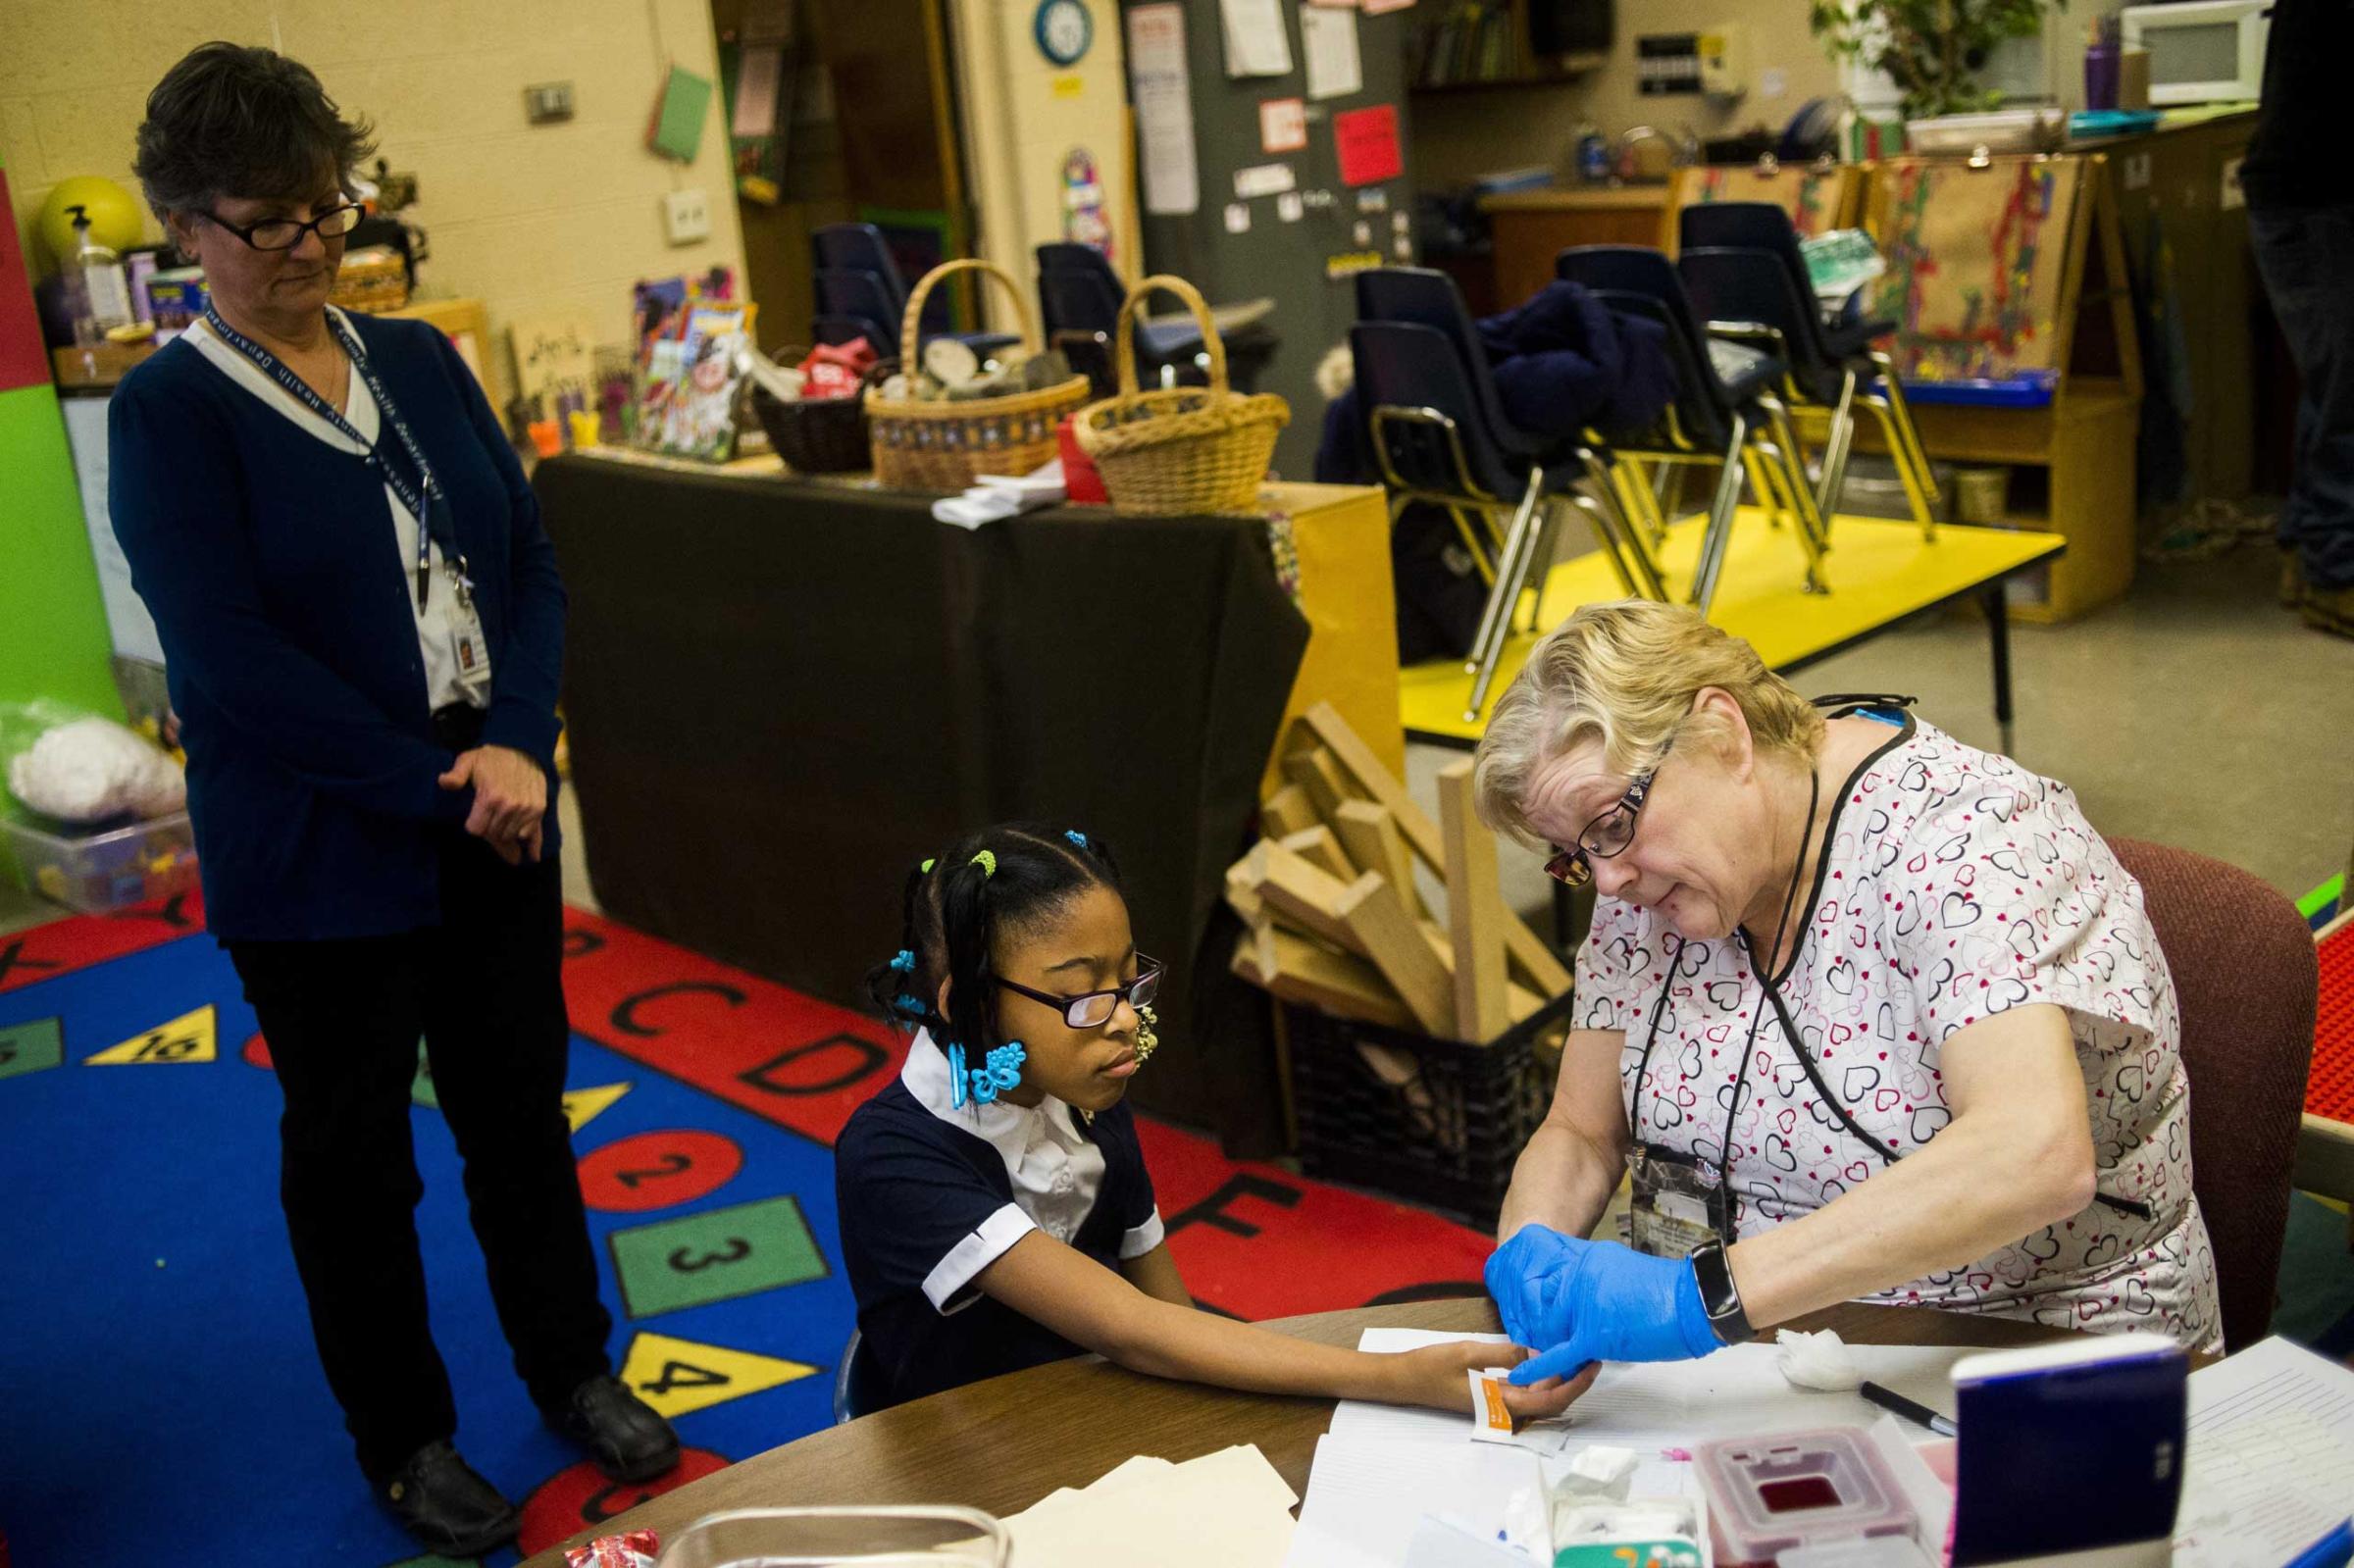 LaShanti Redmond, 10, of Flint, gets her finger poked to test her blood for lead levels at Freeman Elementary School in Flint, Mich., Jan. 12, 2016. The Flint Community Schools, the Genesee County Health Department and Molina Healthcare held a family fun night at the school to get children ages 0 to 6-year-olds tested for lead levels in their blood. The next testing event will be held at Eisenhower Elementary on Jan. 26.